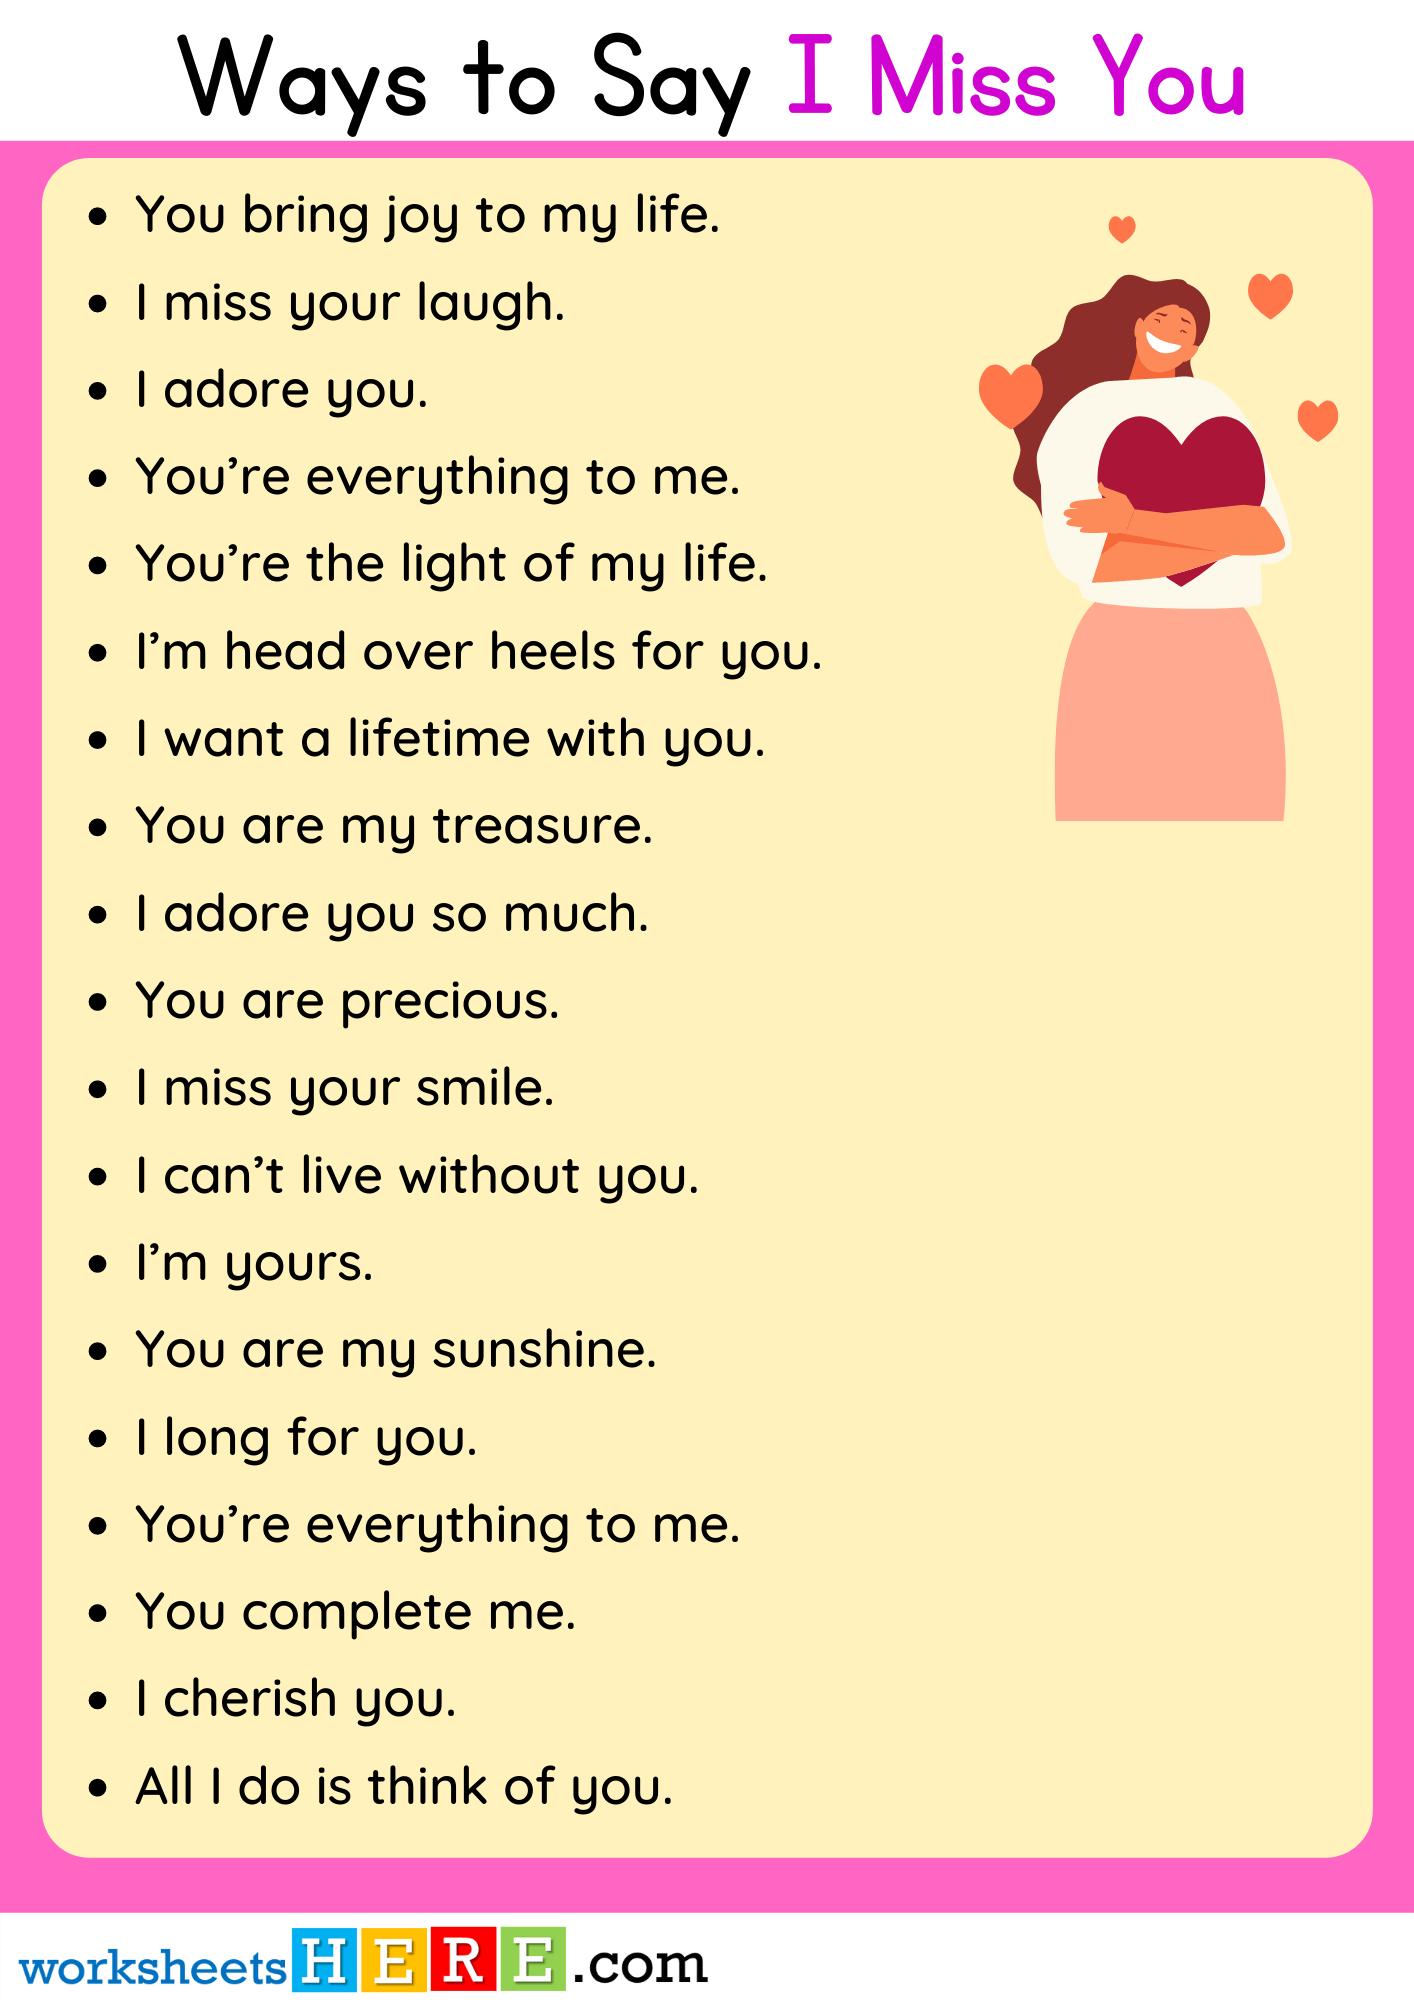 Ways to Say I Miss You in Speaking PDF Worksheet For Students